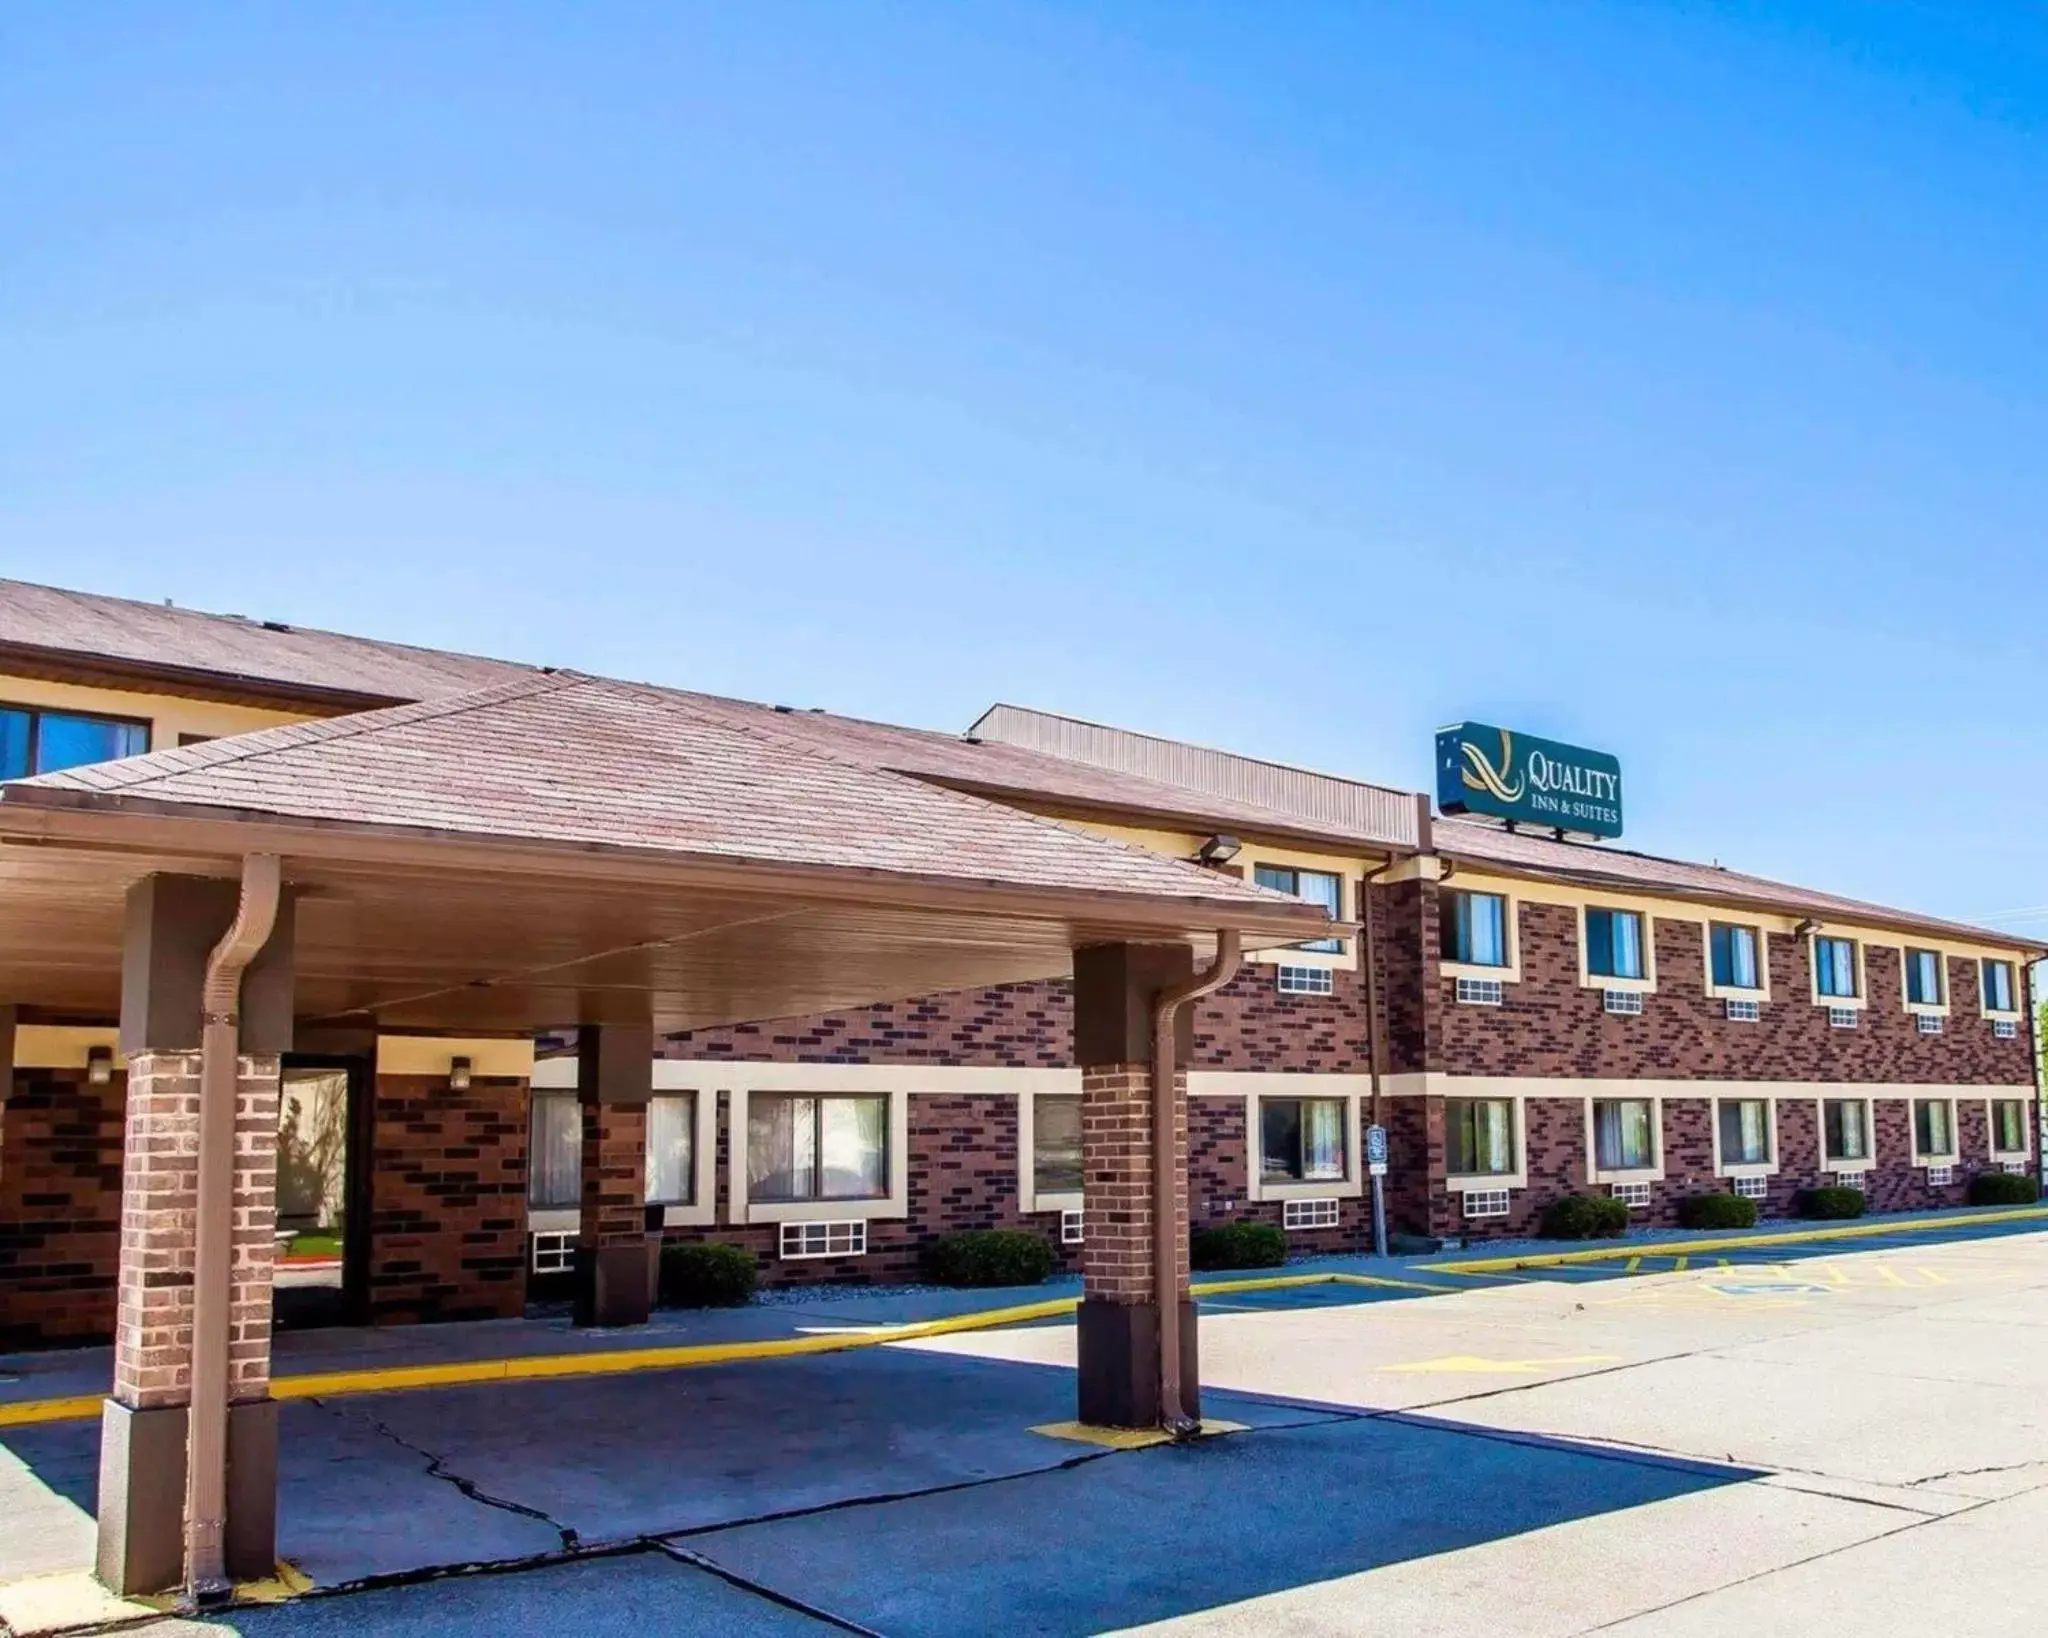 Property Building in Quality Inn & Suites Champaign